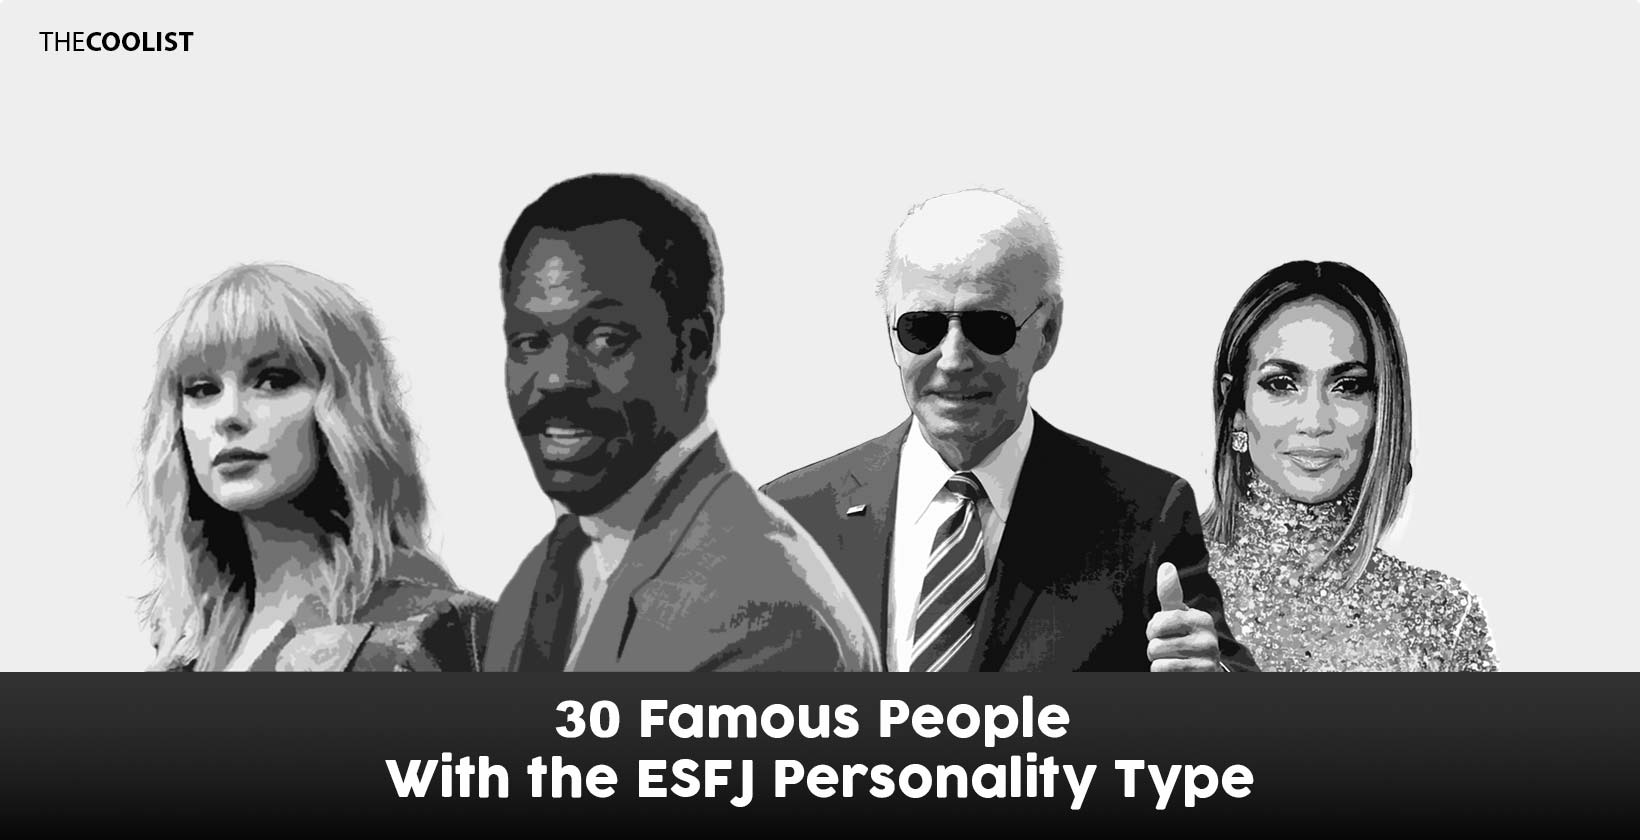 30 Famous People With the ESFJ Personality Type